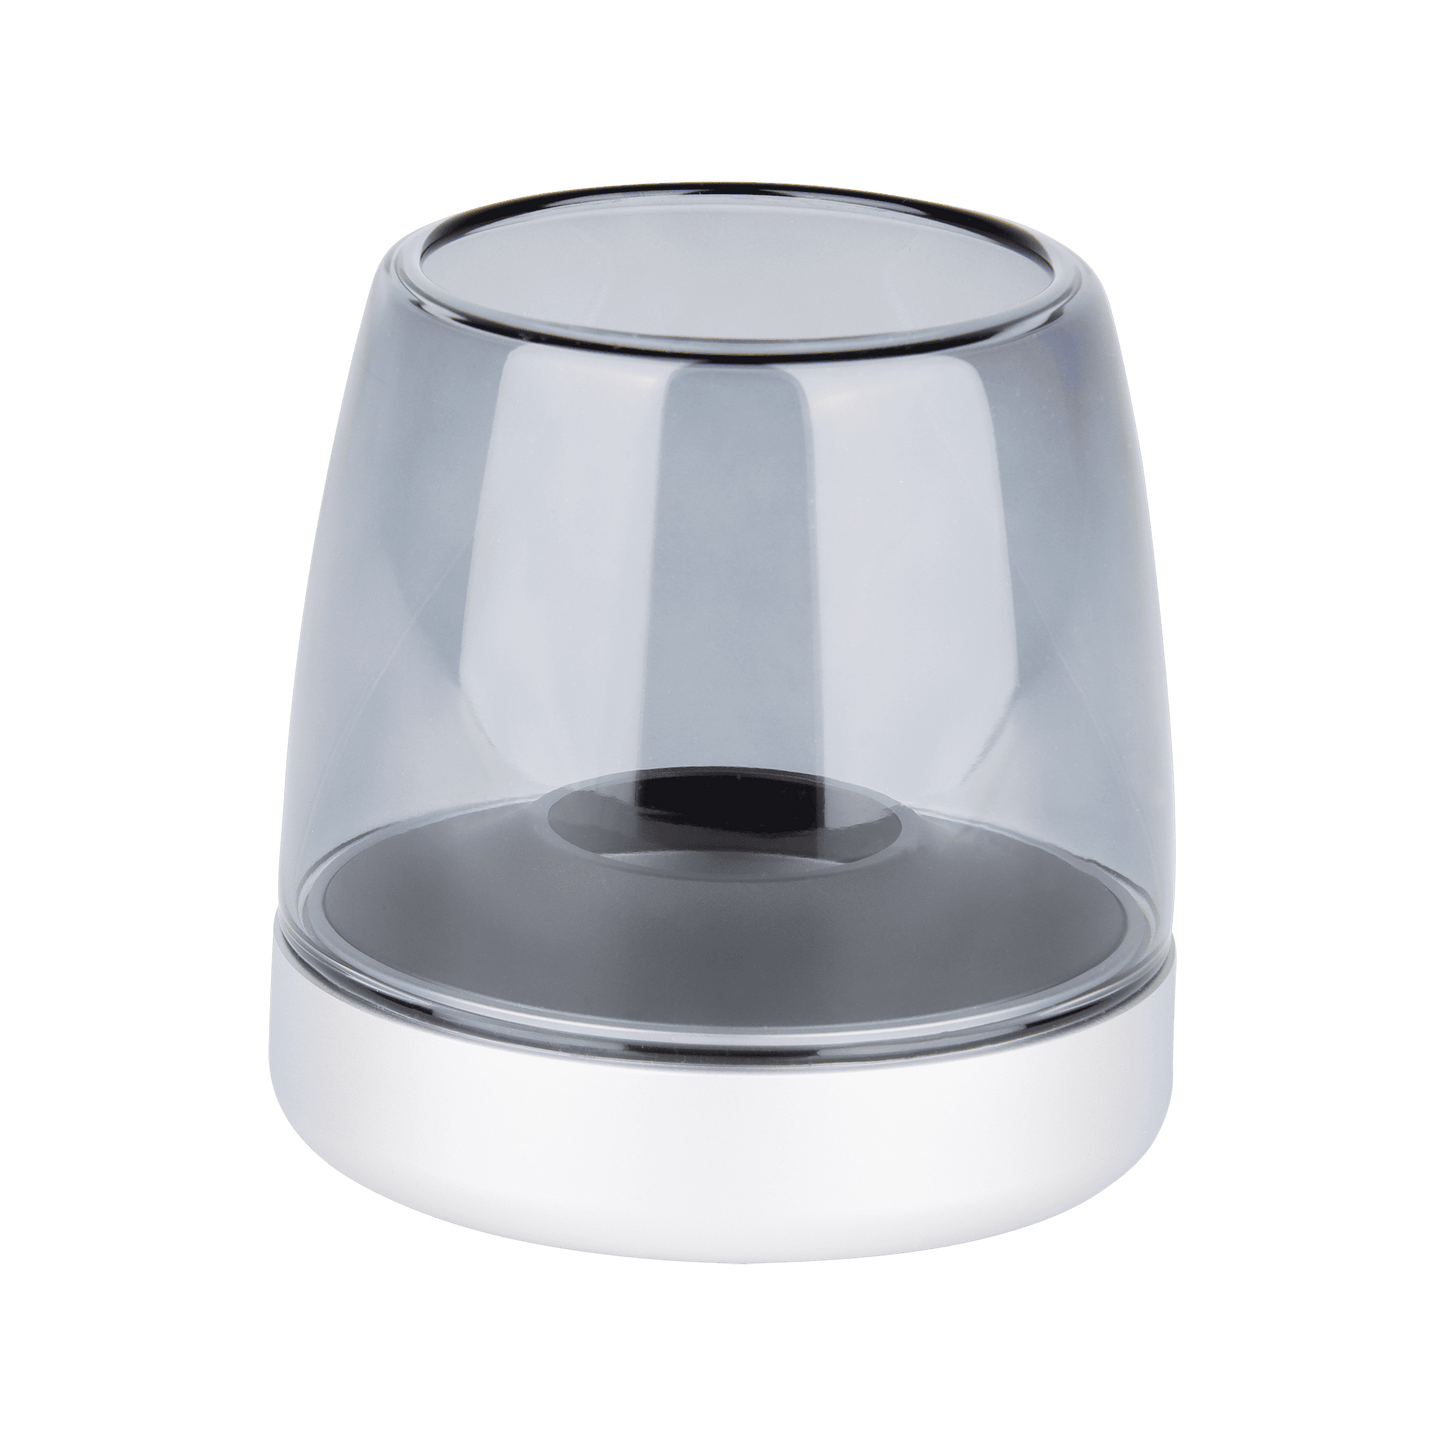 Kooduu Glow 10 Portable LED Flameless Candle in Frosted Silver